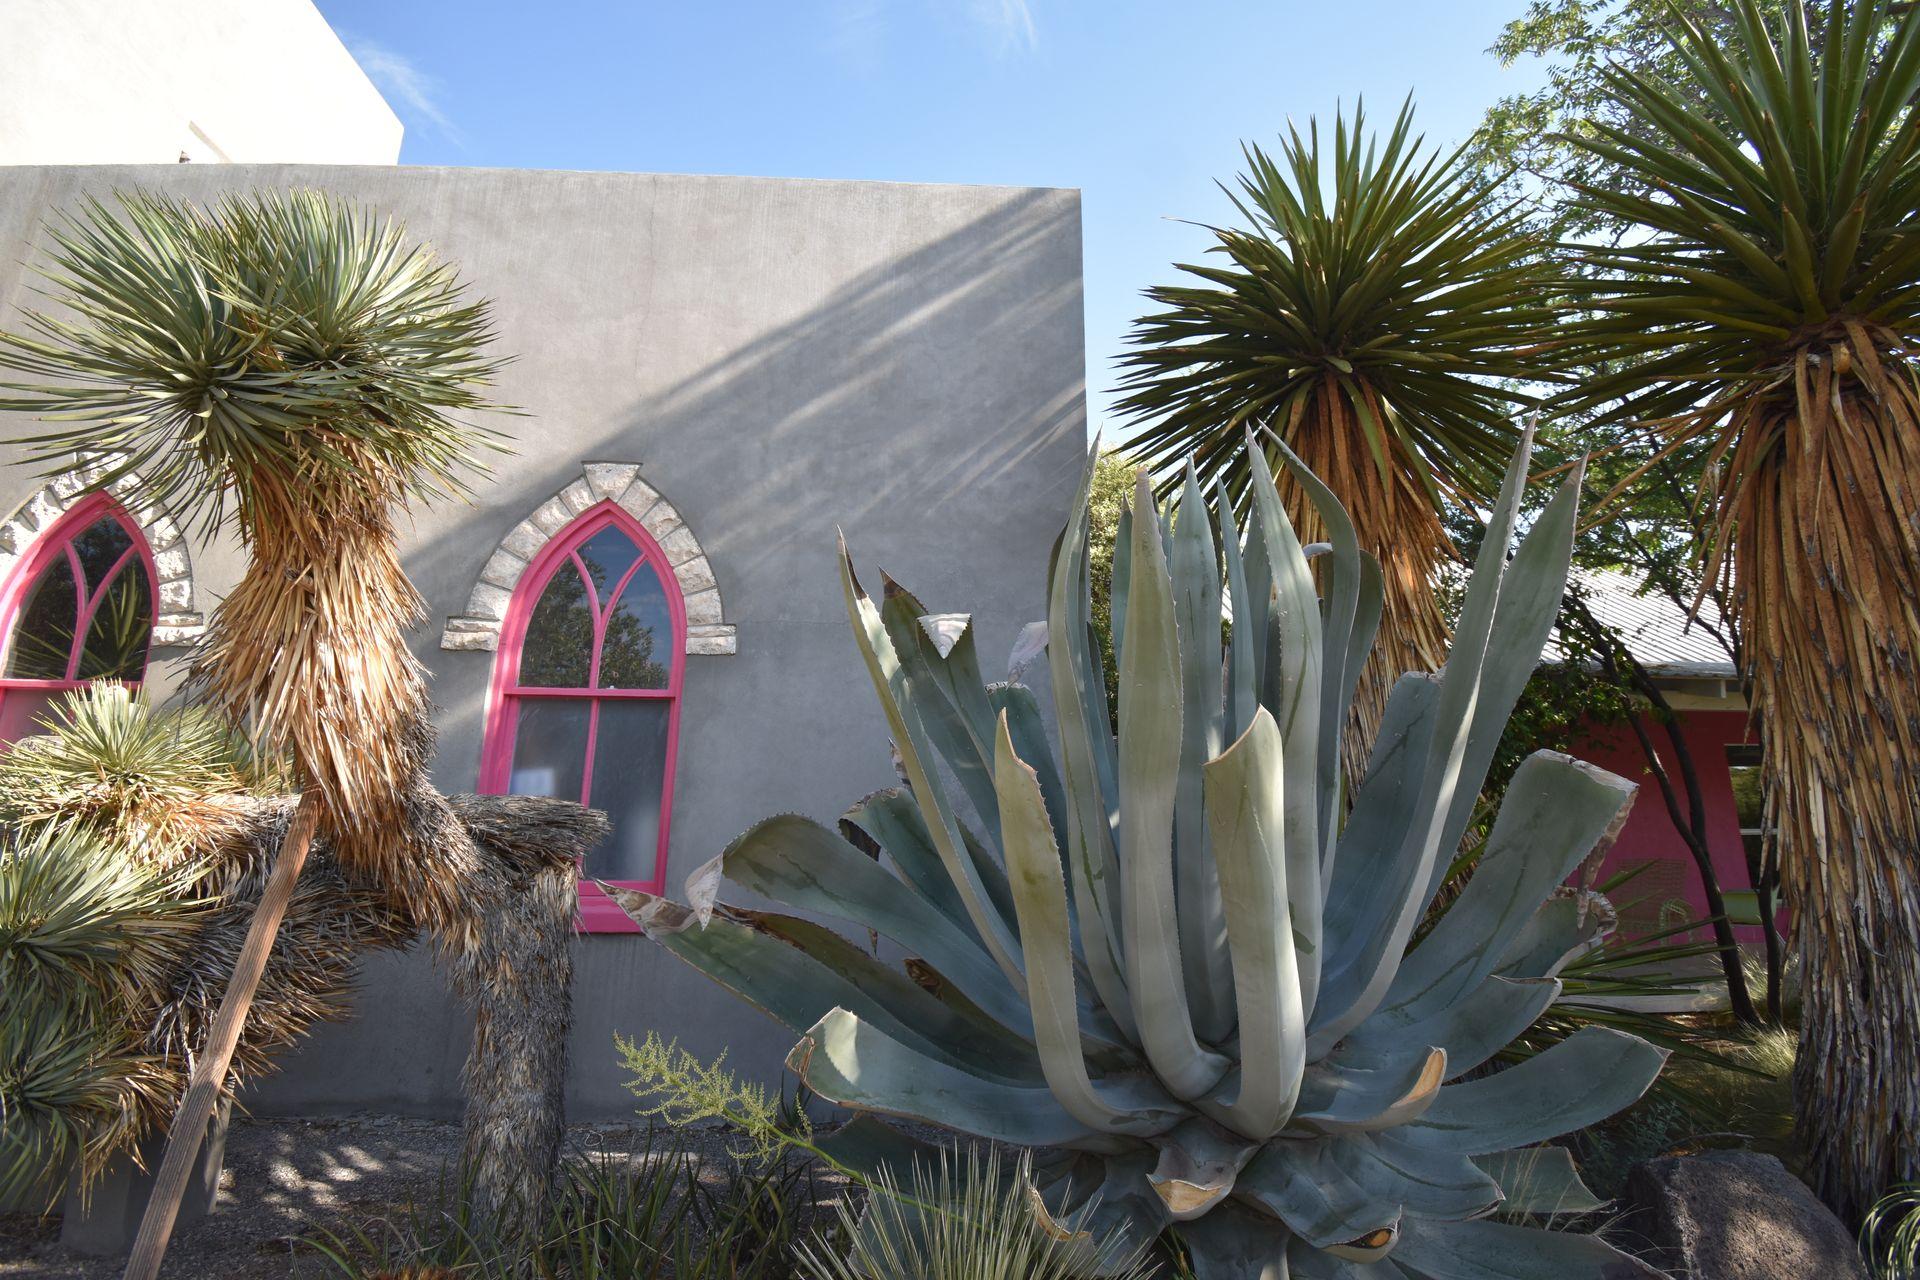 A gray building with a pink window frame and a large desert plant in front of it.